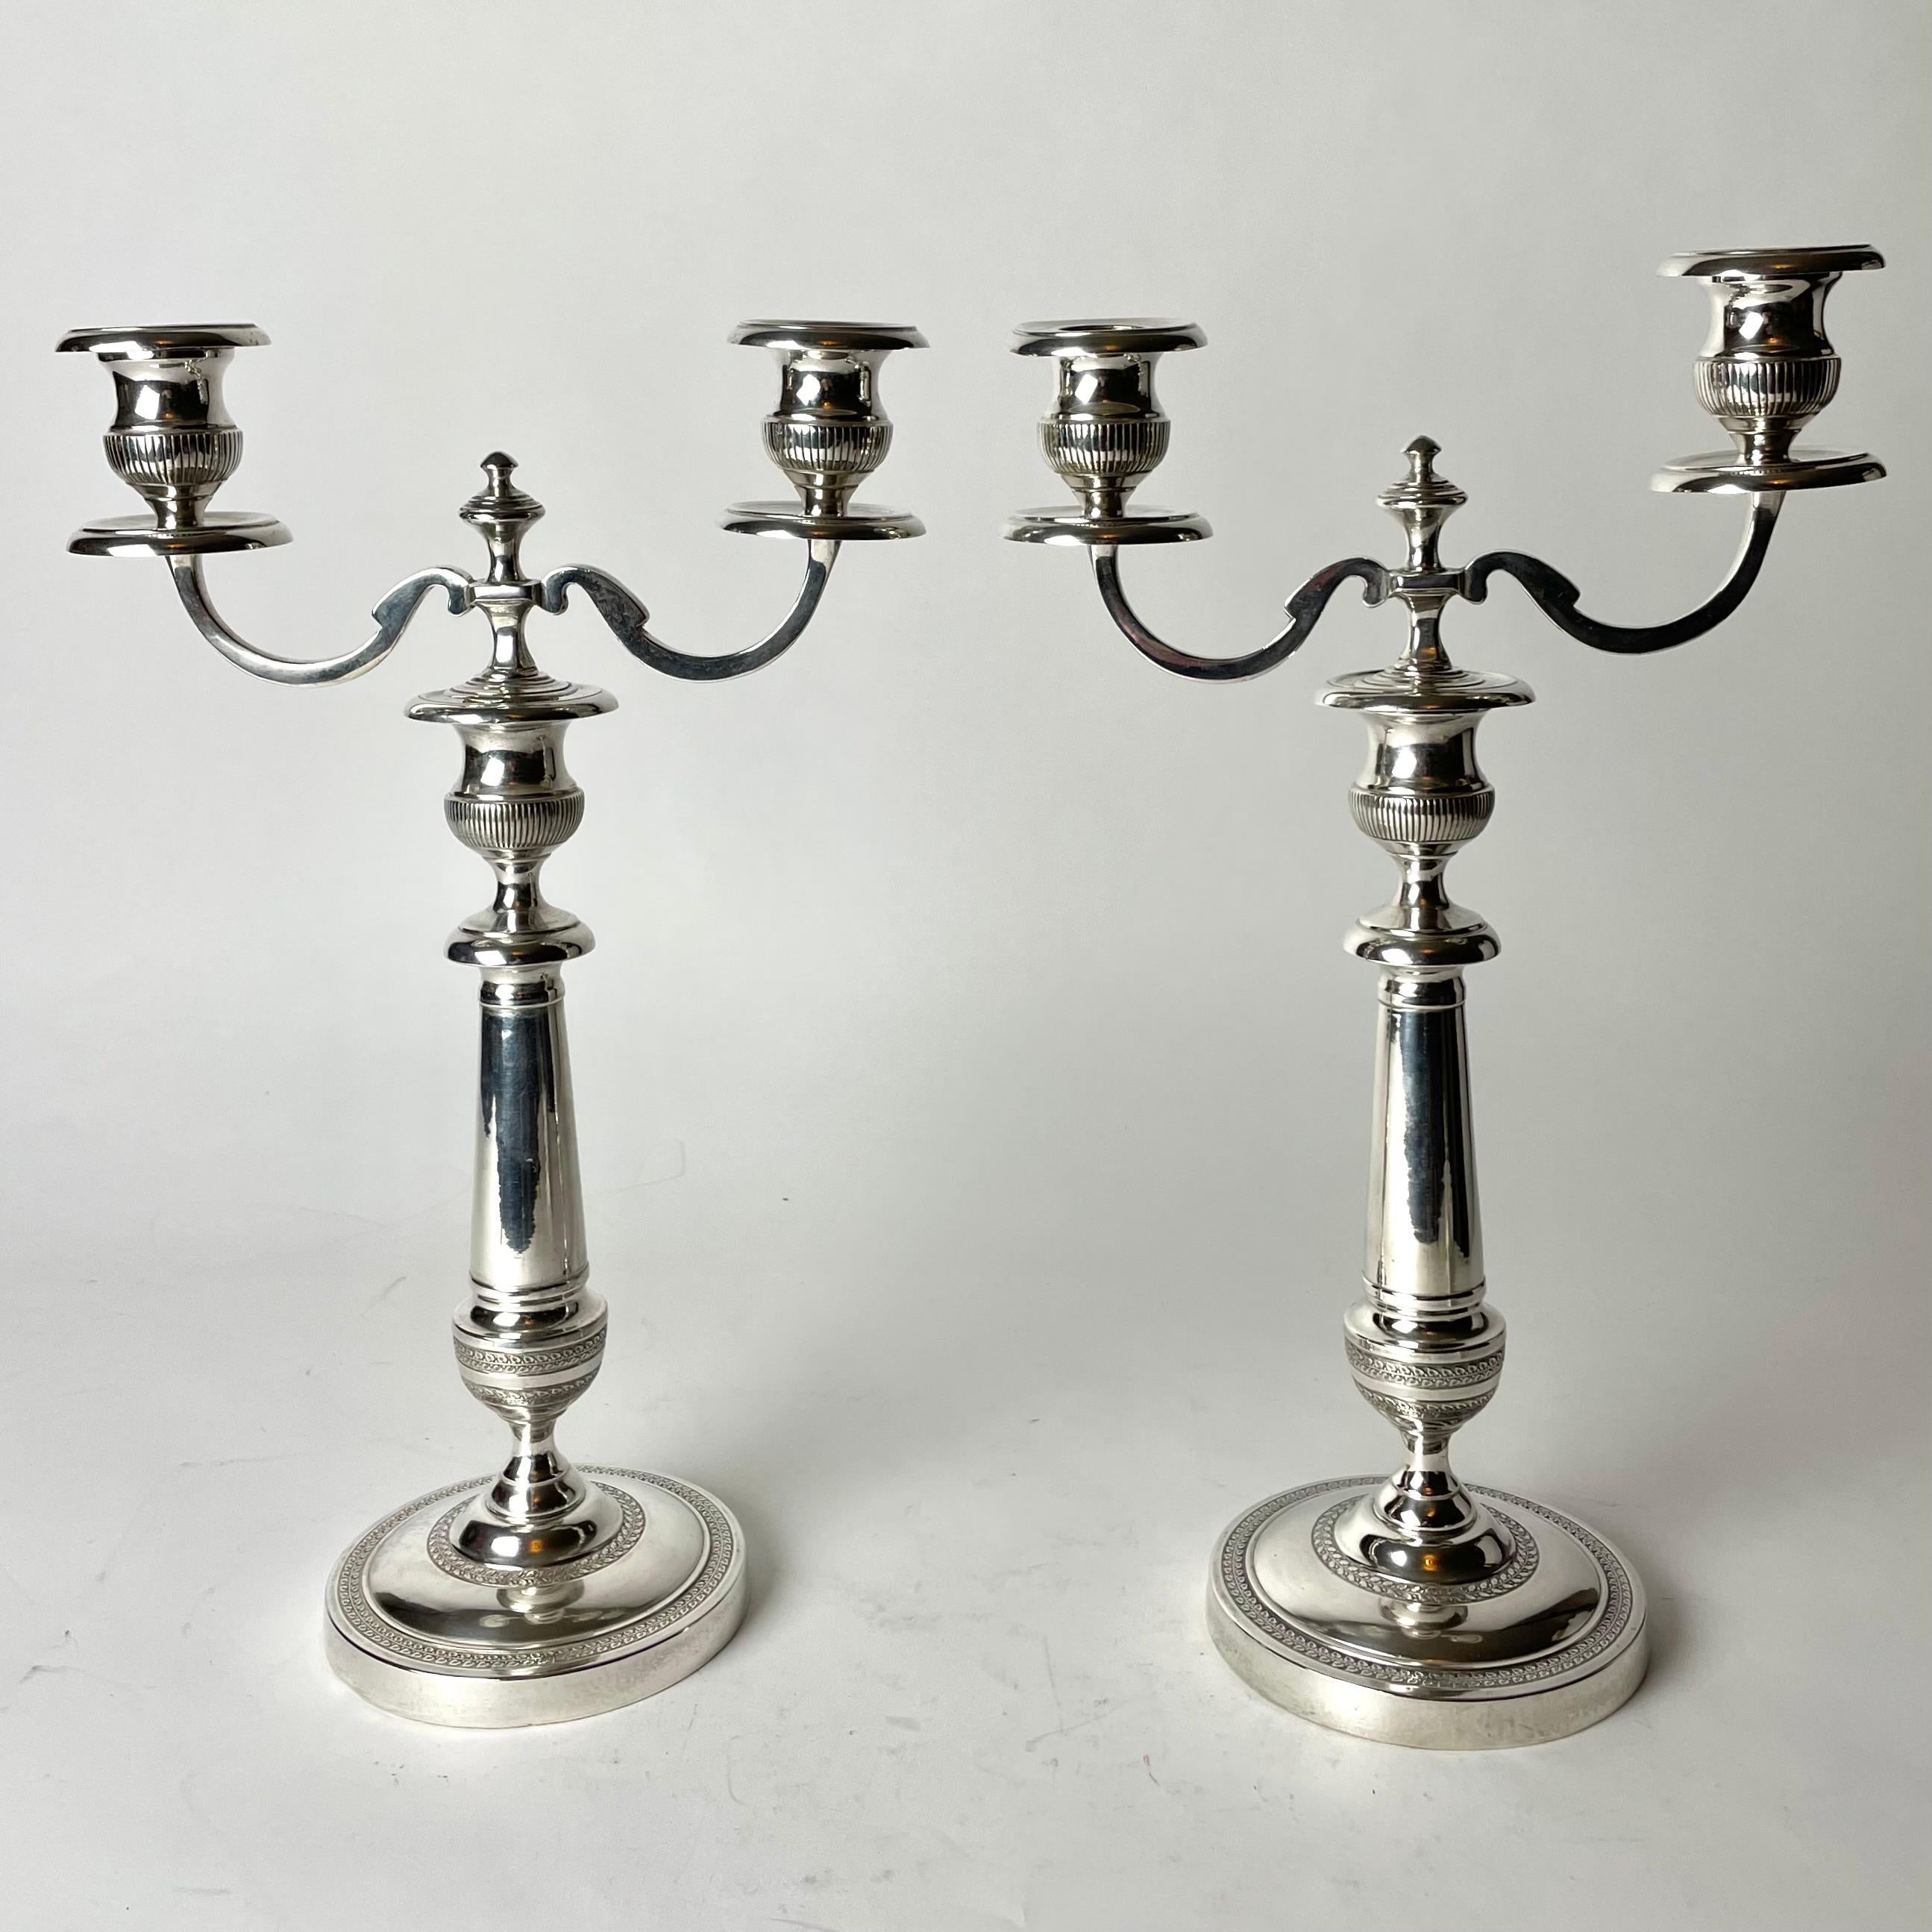 A pair of beautiful silver-plated Candelabras. Swedish Empire (Karl Johan) from the 1820s. Unusual model, can be used both as candelabra and ordinary candlesticks.


Wear consistent with age and use 